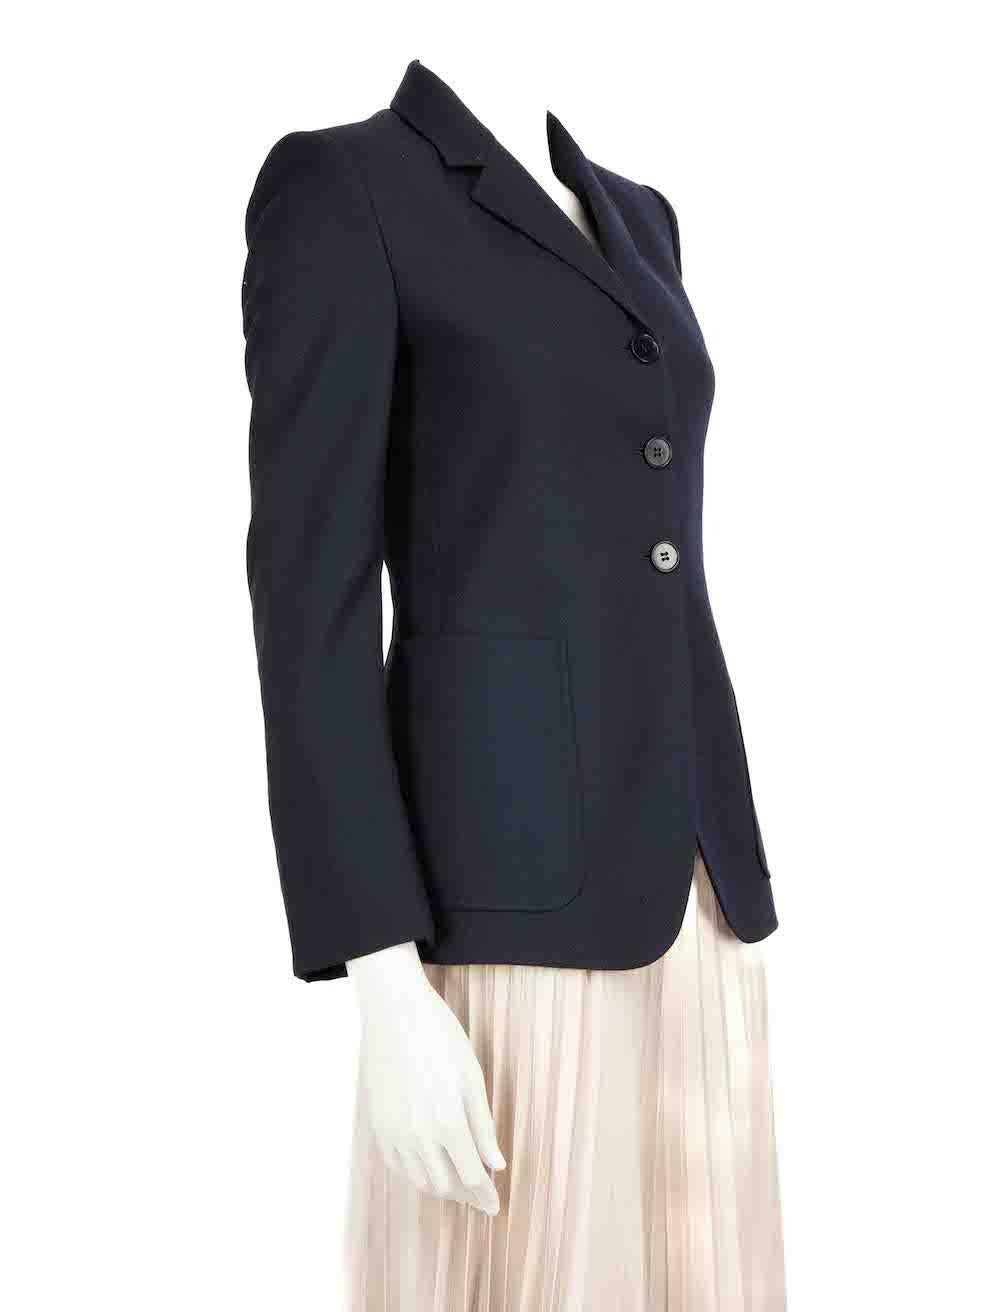 CONDITION is Very good. Hardly any visible wear to blazer is evident on this used Stella McCartney designer resale item.
 
 
 
 Details
 
 
 Navy
 
 Wool
 
 Blazer jacket
 
 Single breasted
 
 Shoulder padded
 
 2x Front side pockets
 
 
 
 
 
 Made